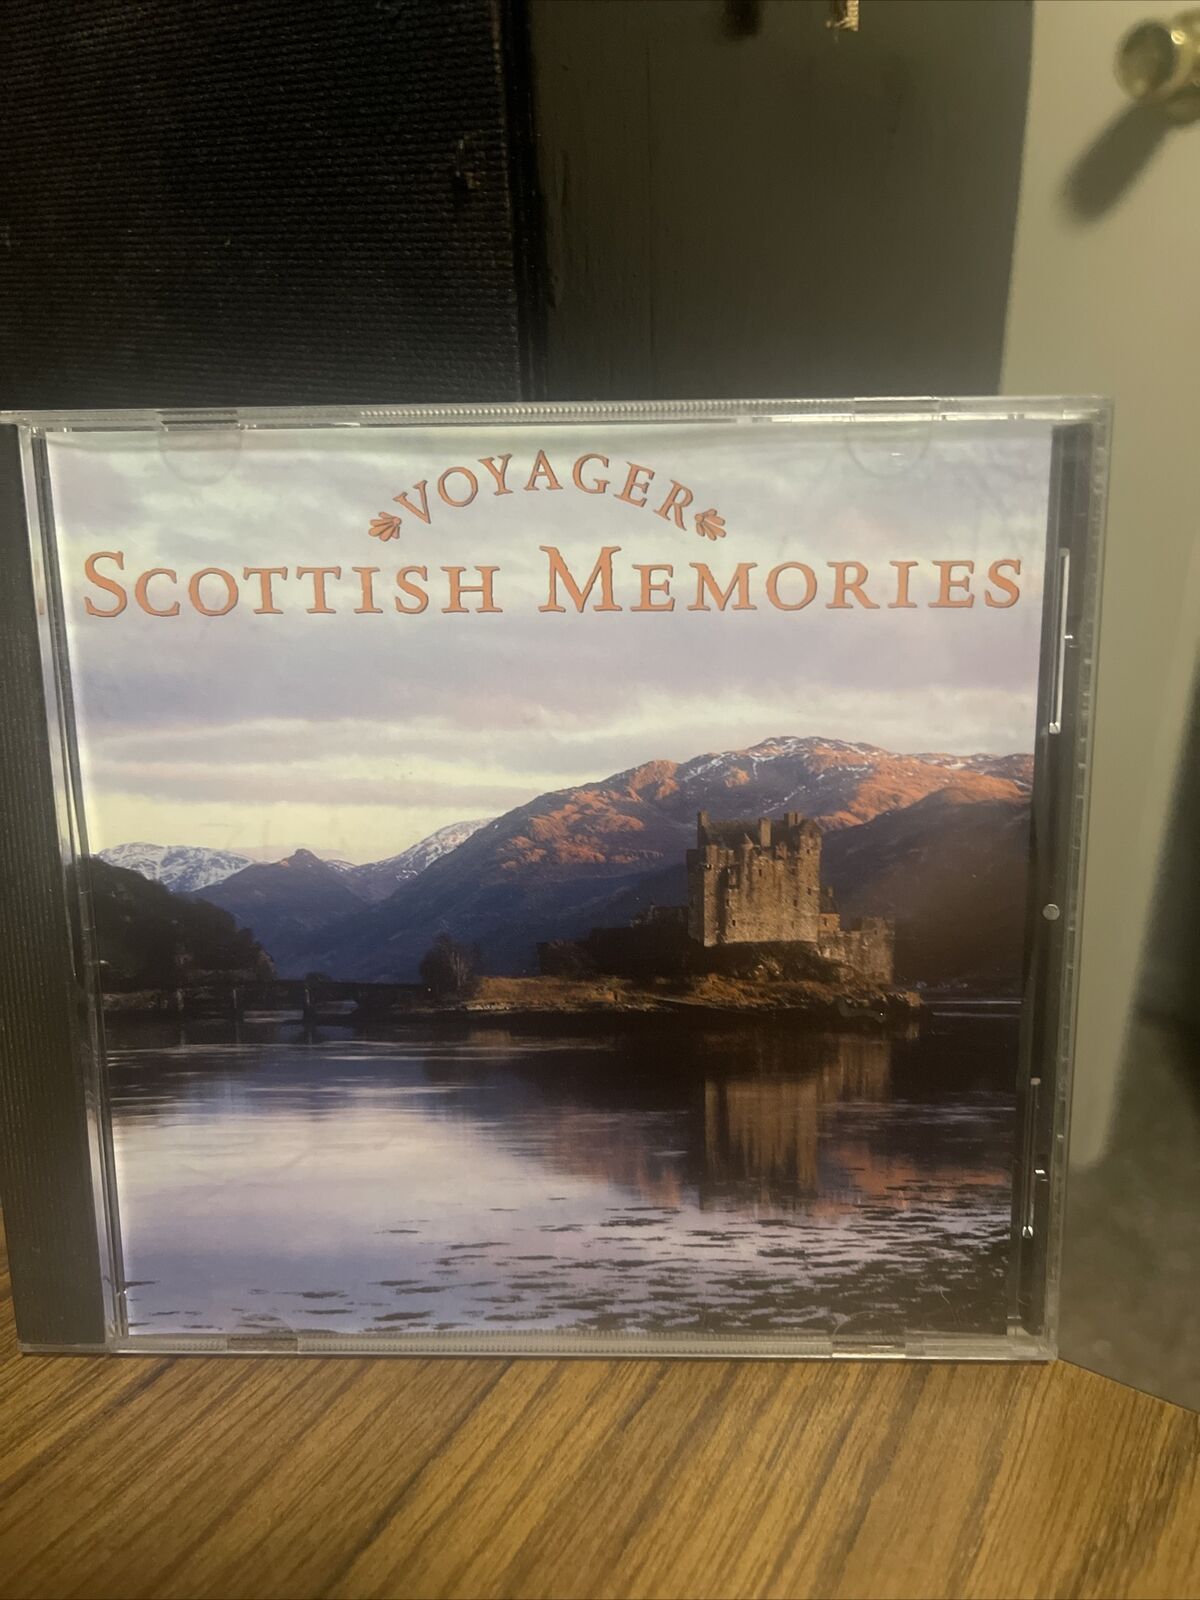 Voyager Series: Scottish Moods by Various Artists (CD, Feb-2001, Columbia River